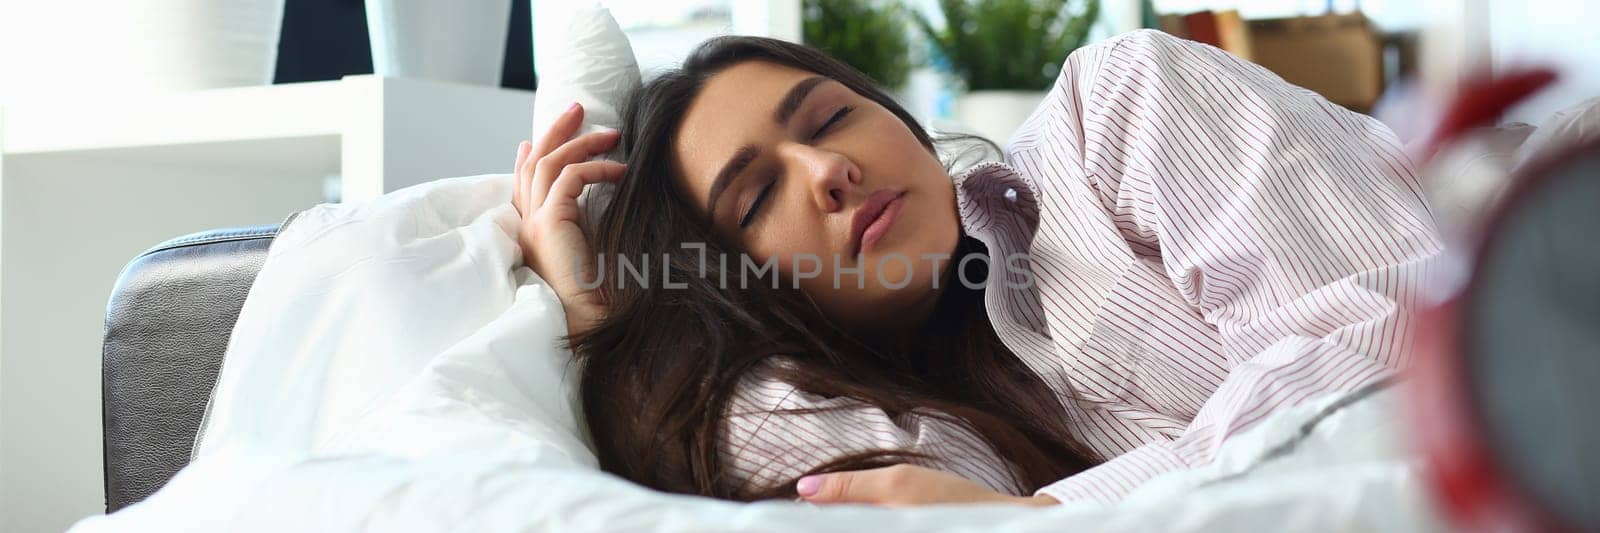 Sleepy woman with closed eyes dreaming about future vacation or sleeping in the bedroom by kuprevich